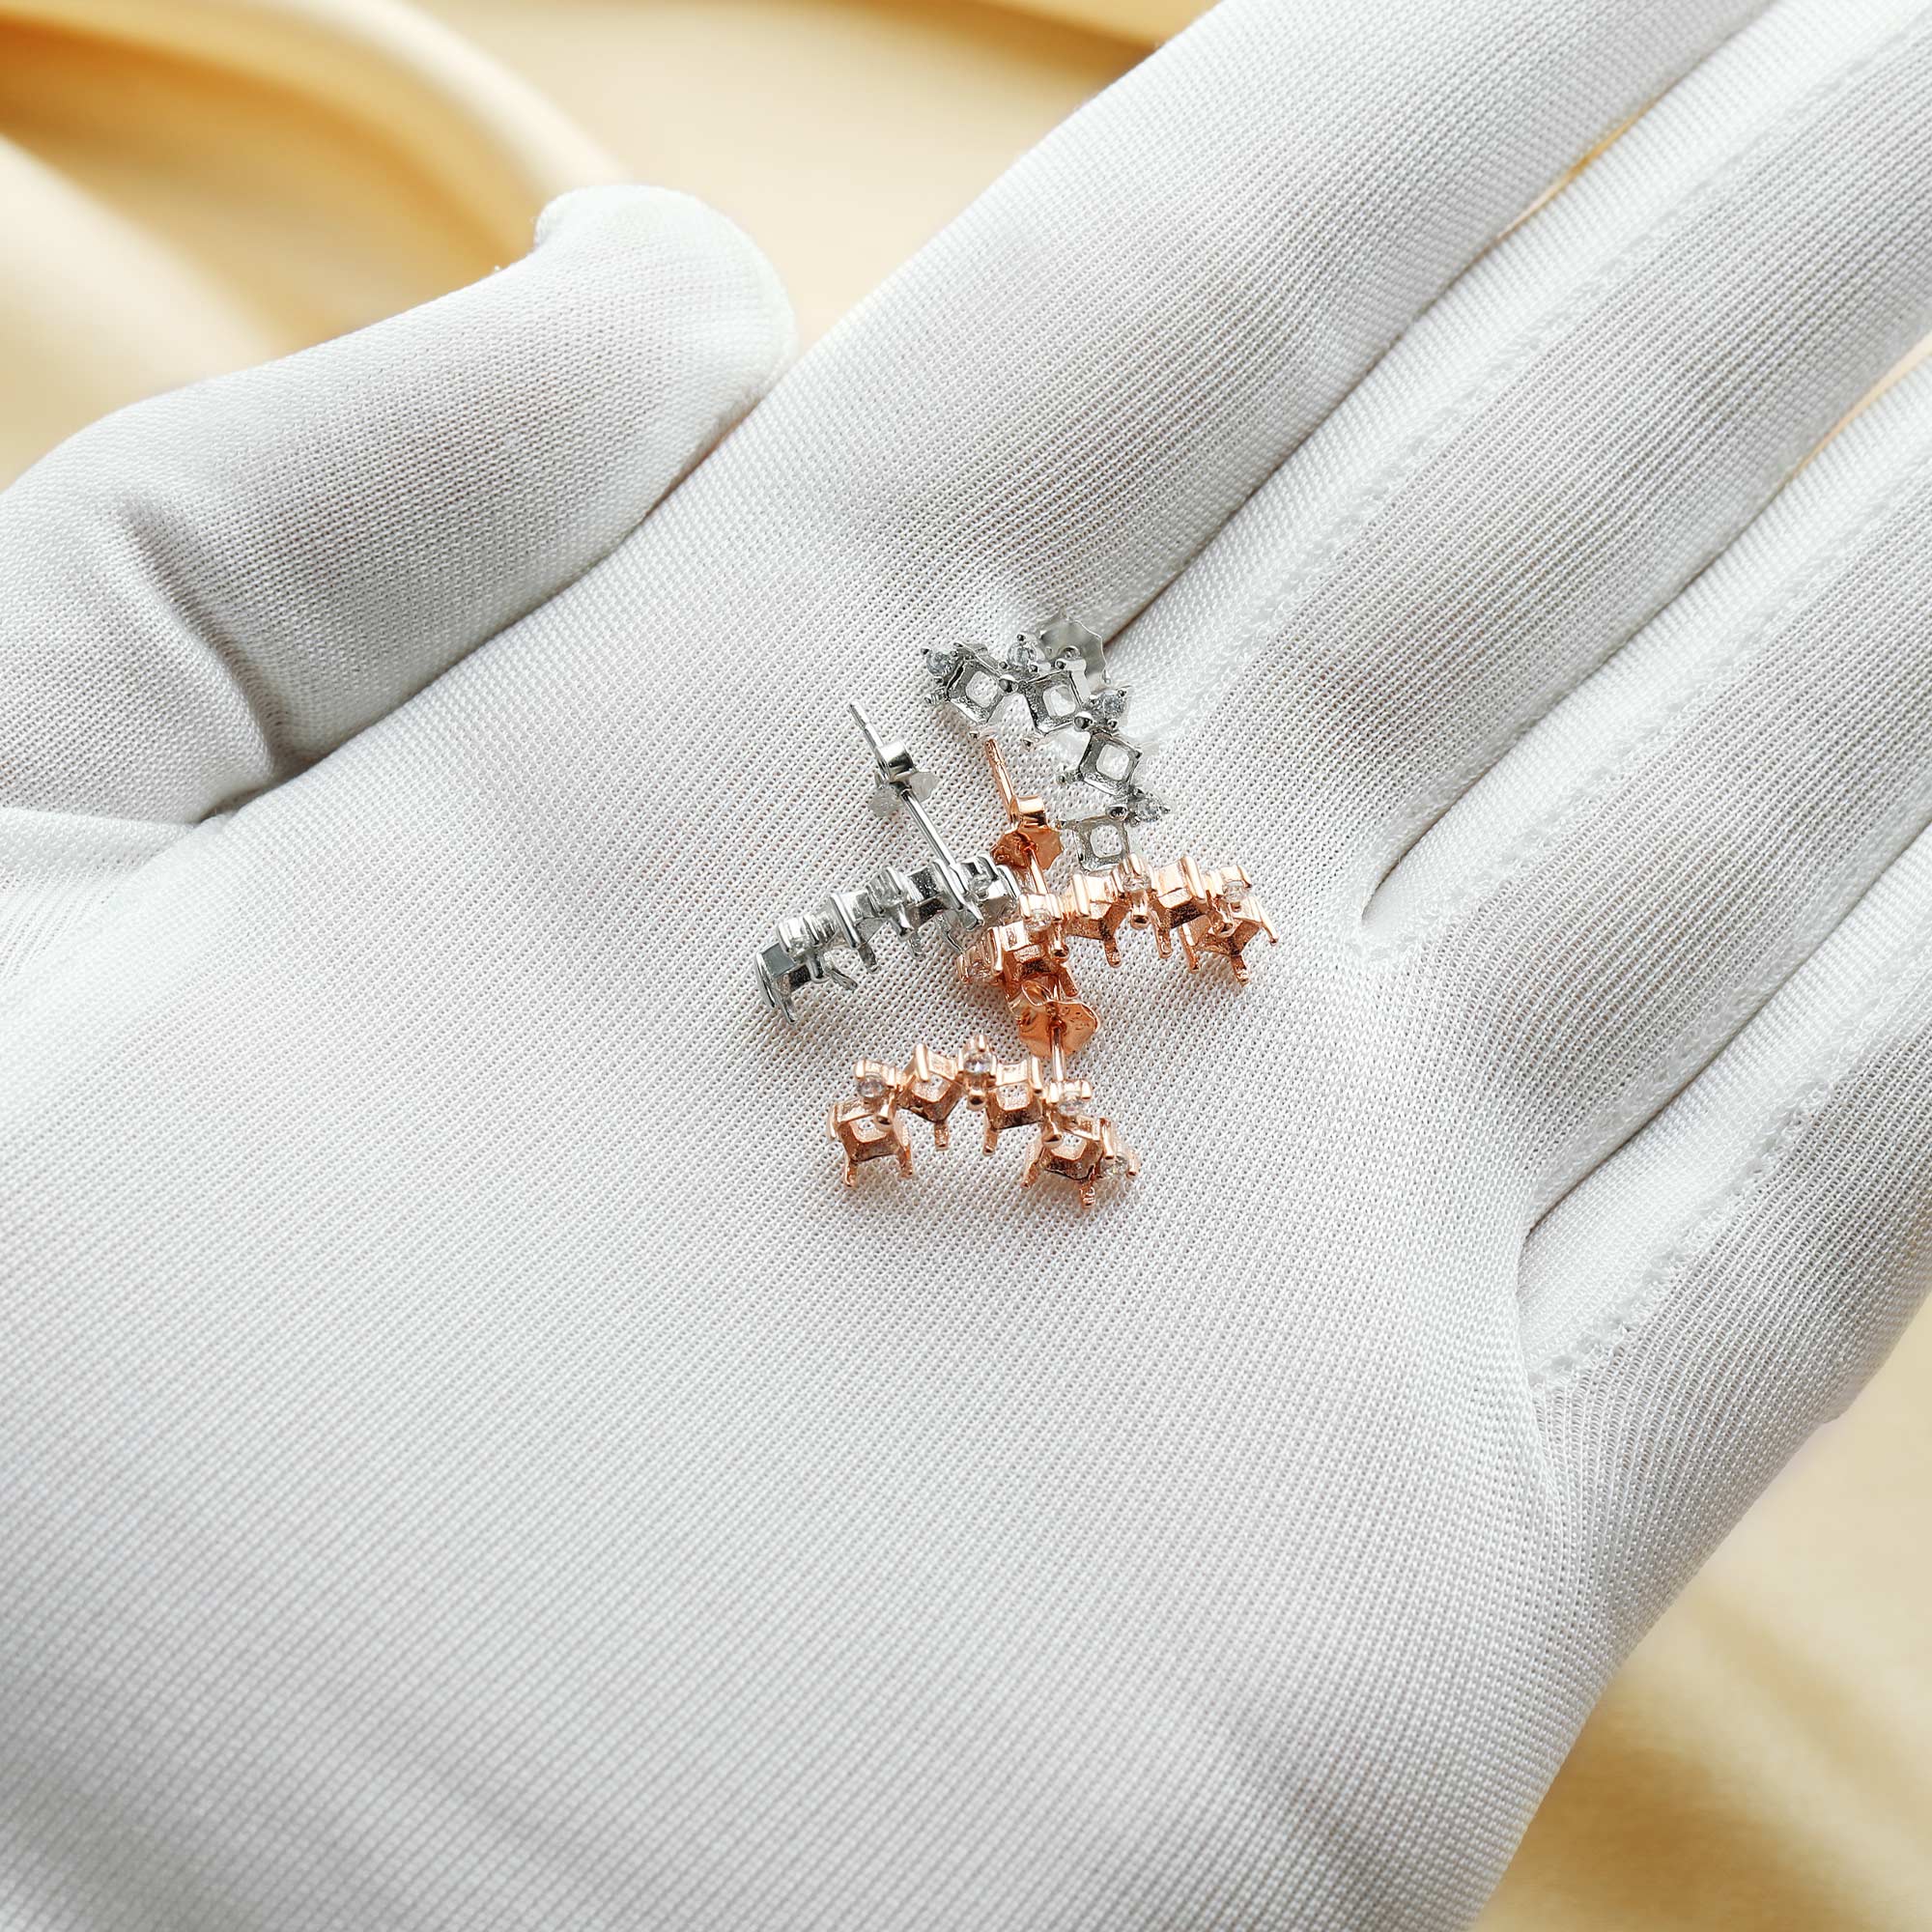 3MM Square Prong Studs Earrings Settings,4 Stone Curved Solid 925 Sterling Silver Rose Gold Plated Earrings,DIY Earrings Bezel Supplies 1706102 - Click Image to Close